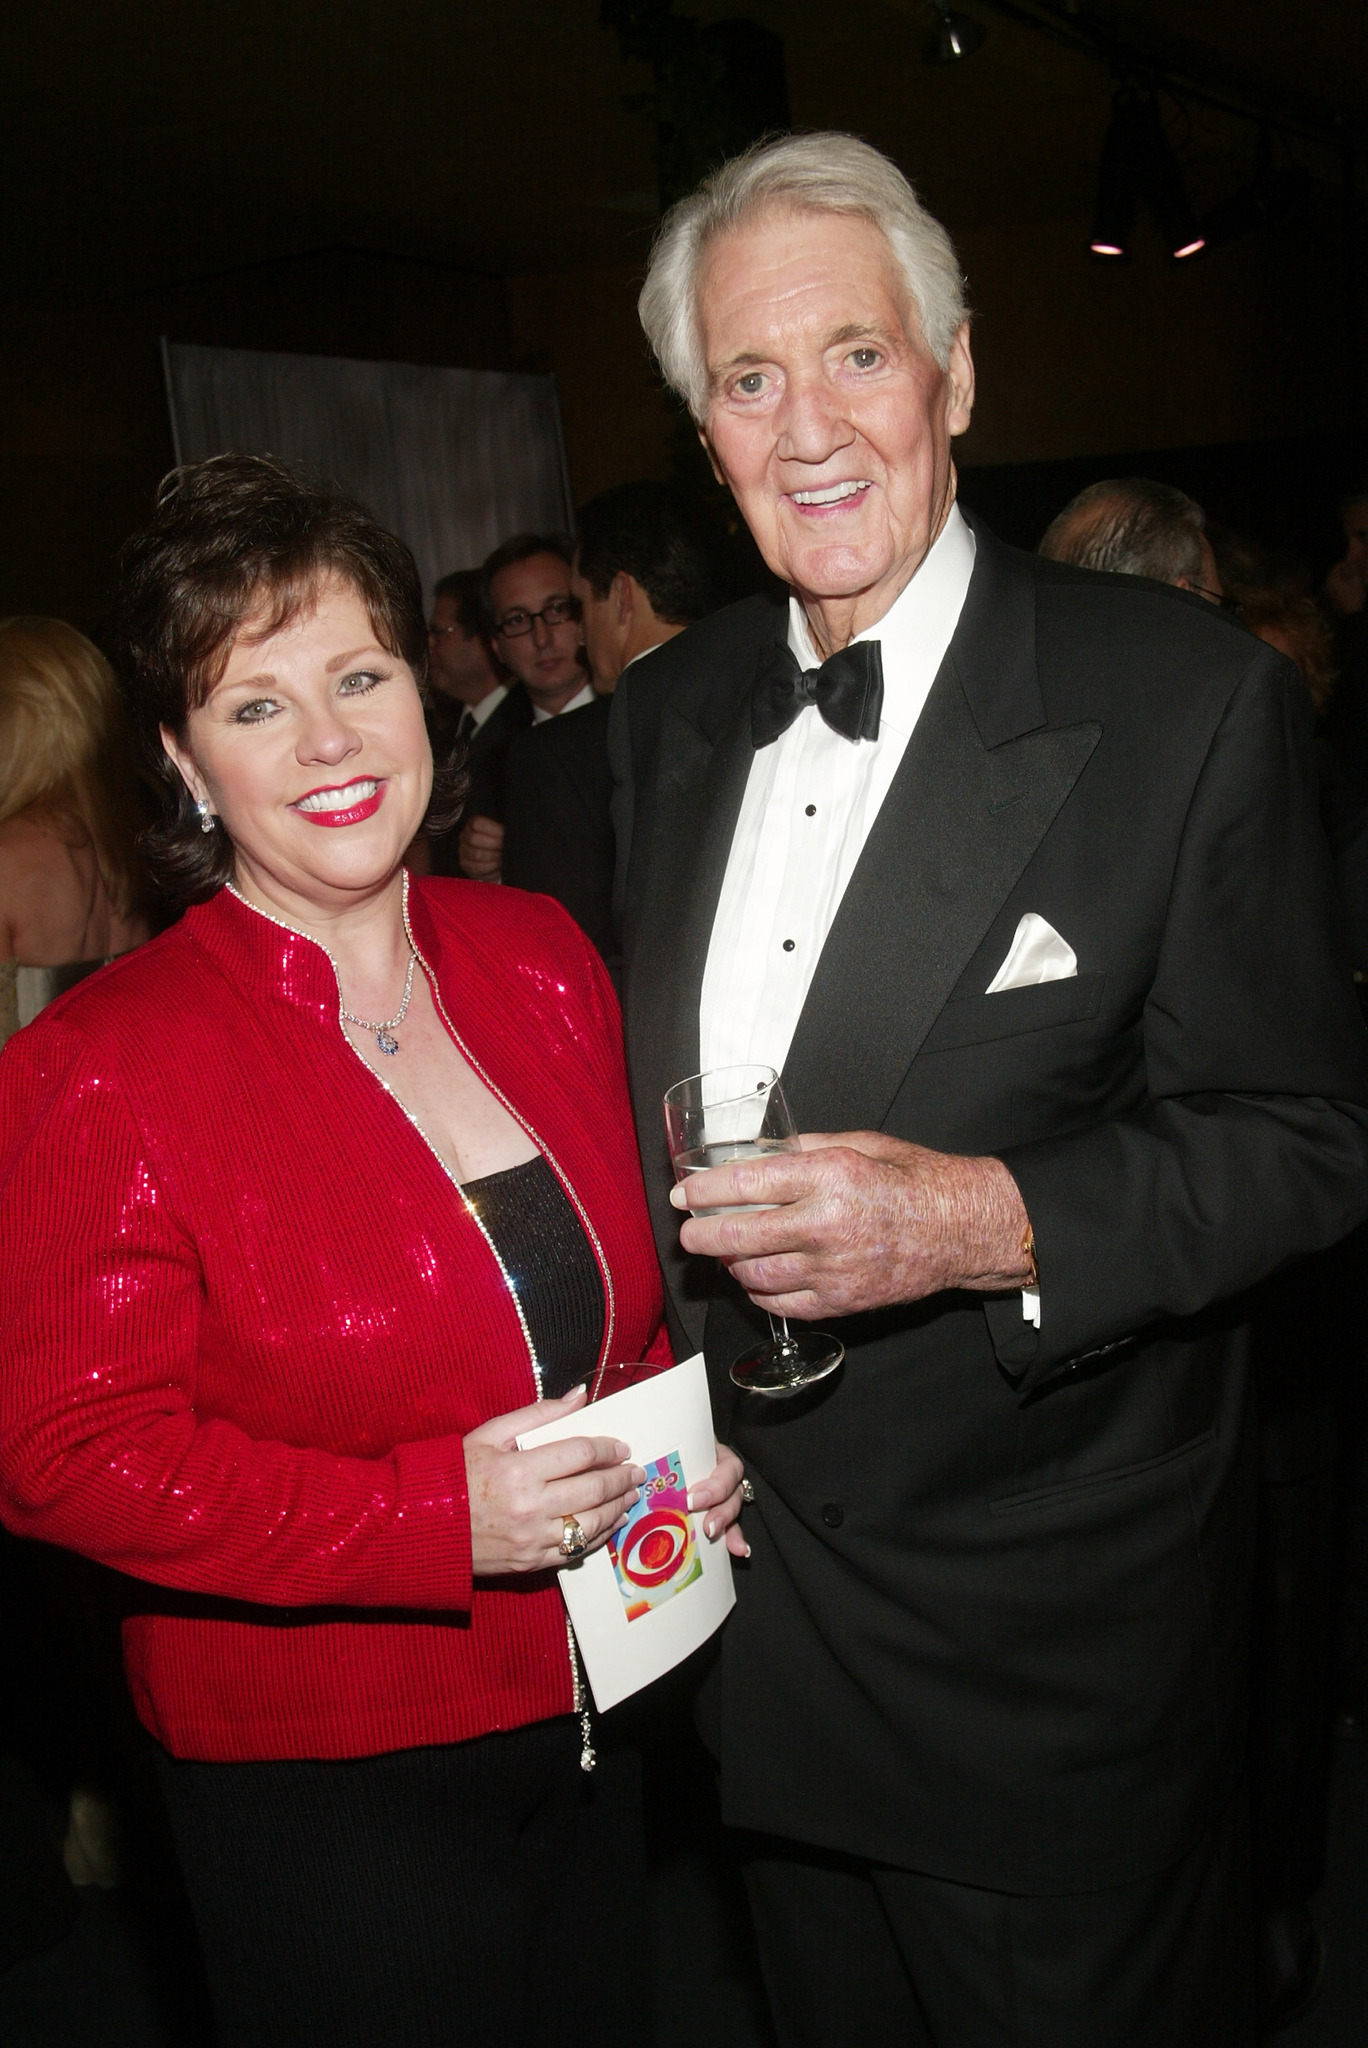 Pat Summerall and his wife Cheri attend the cocktail party for the 